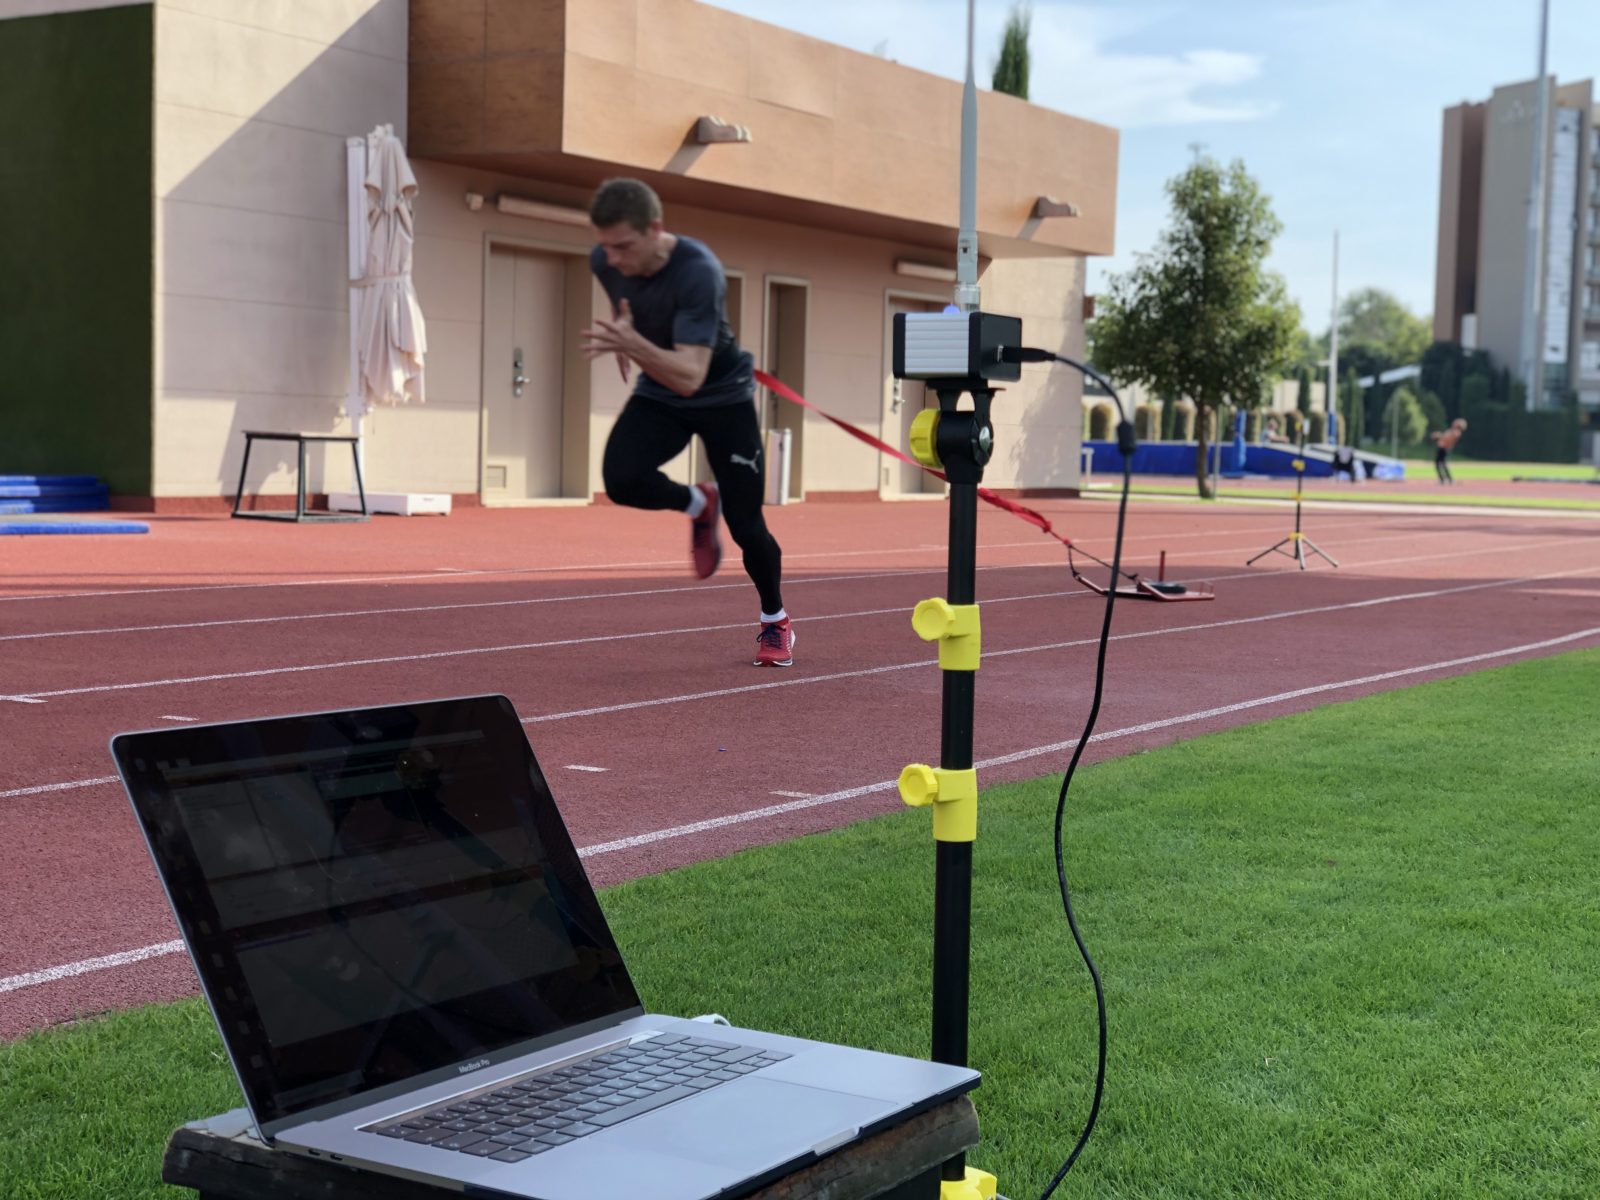 Athlete training sprints on track while his speed in measured with Tendo Sprint System by Tendo Sport